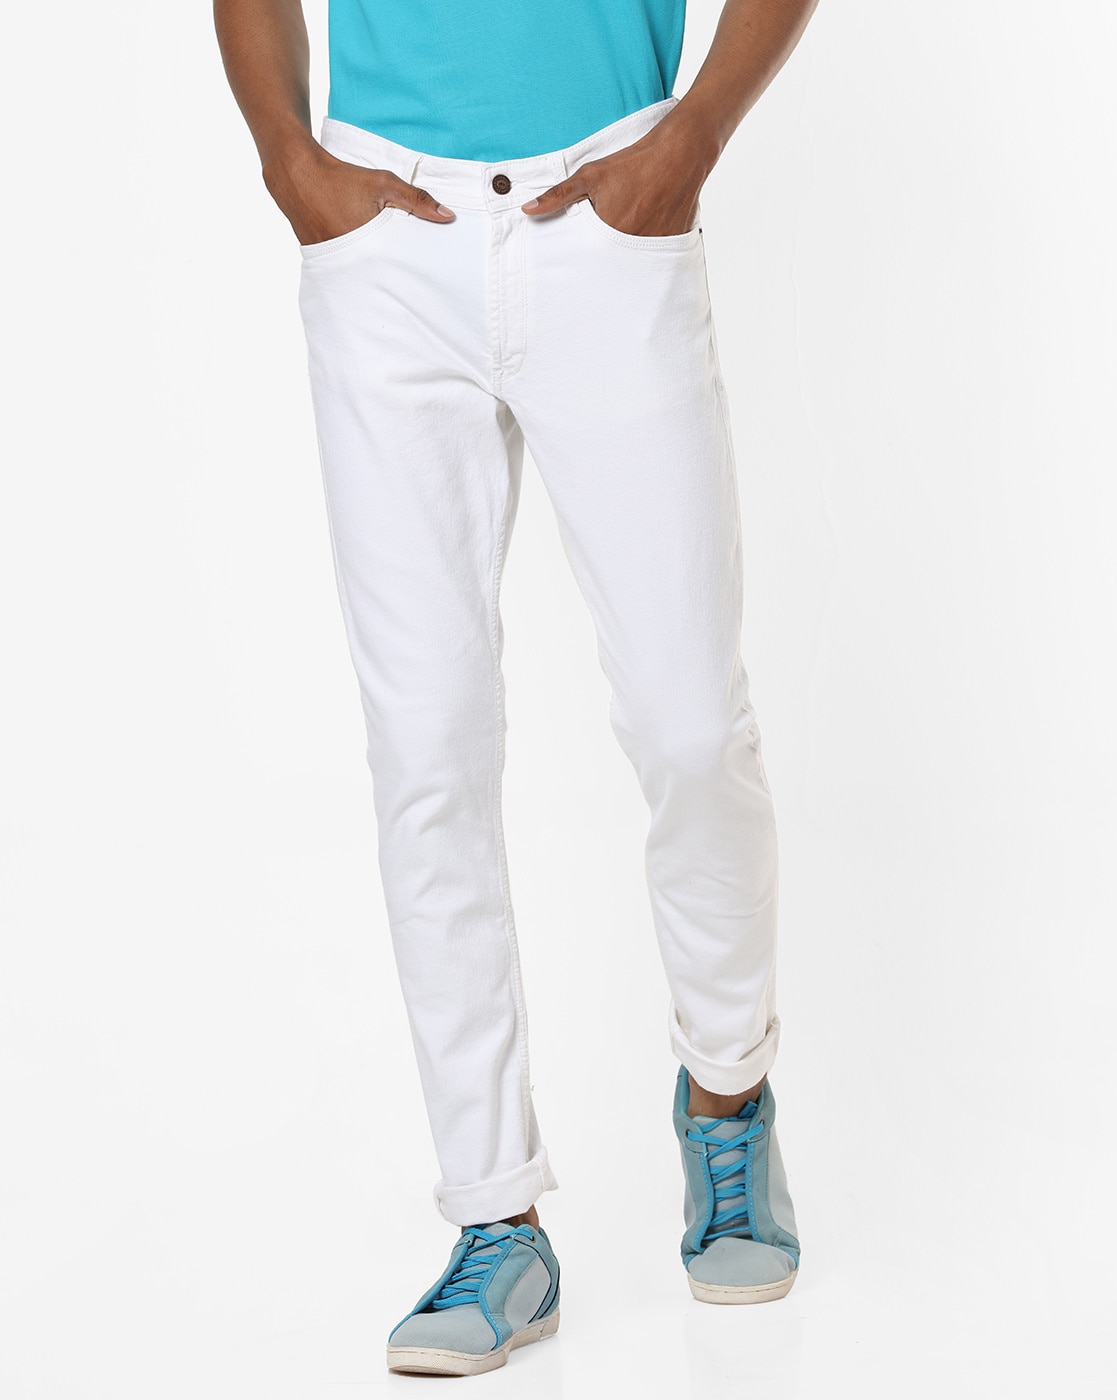 men's relaxed fit white jeans